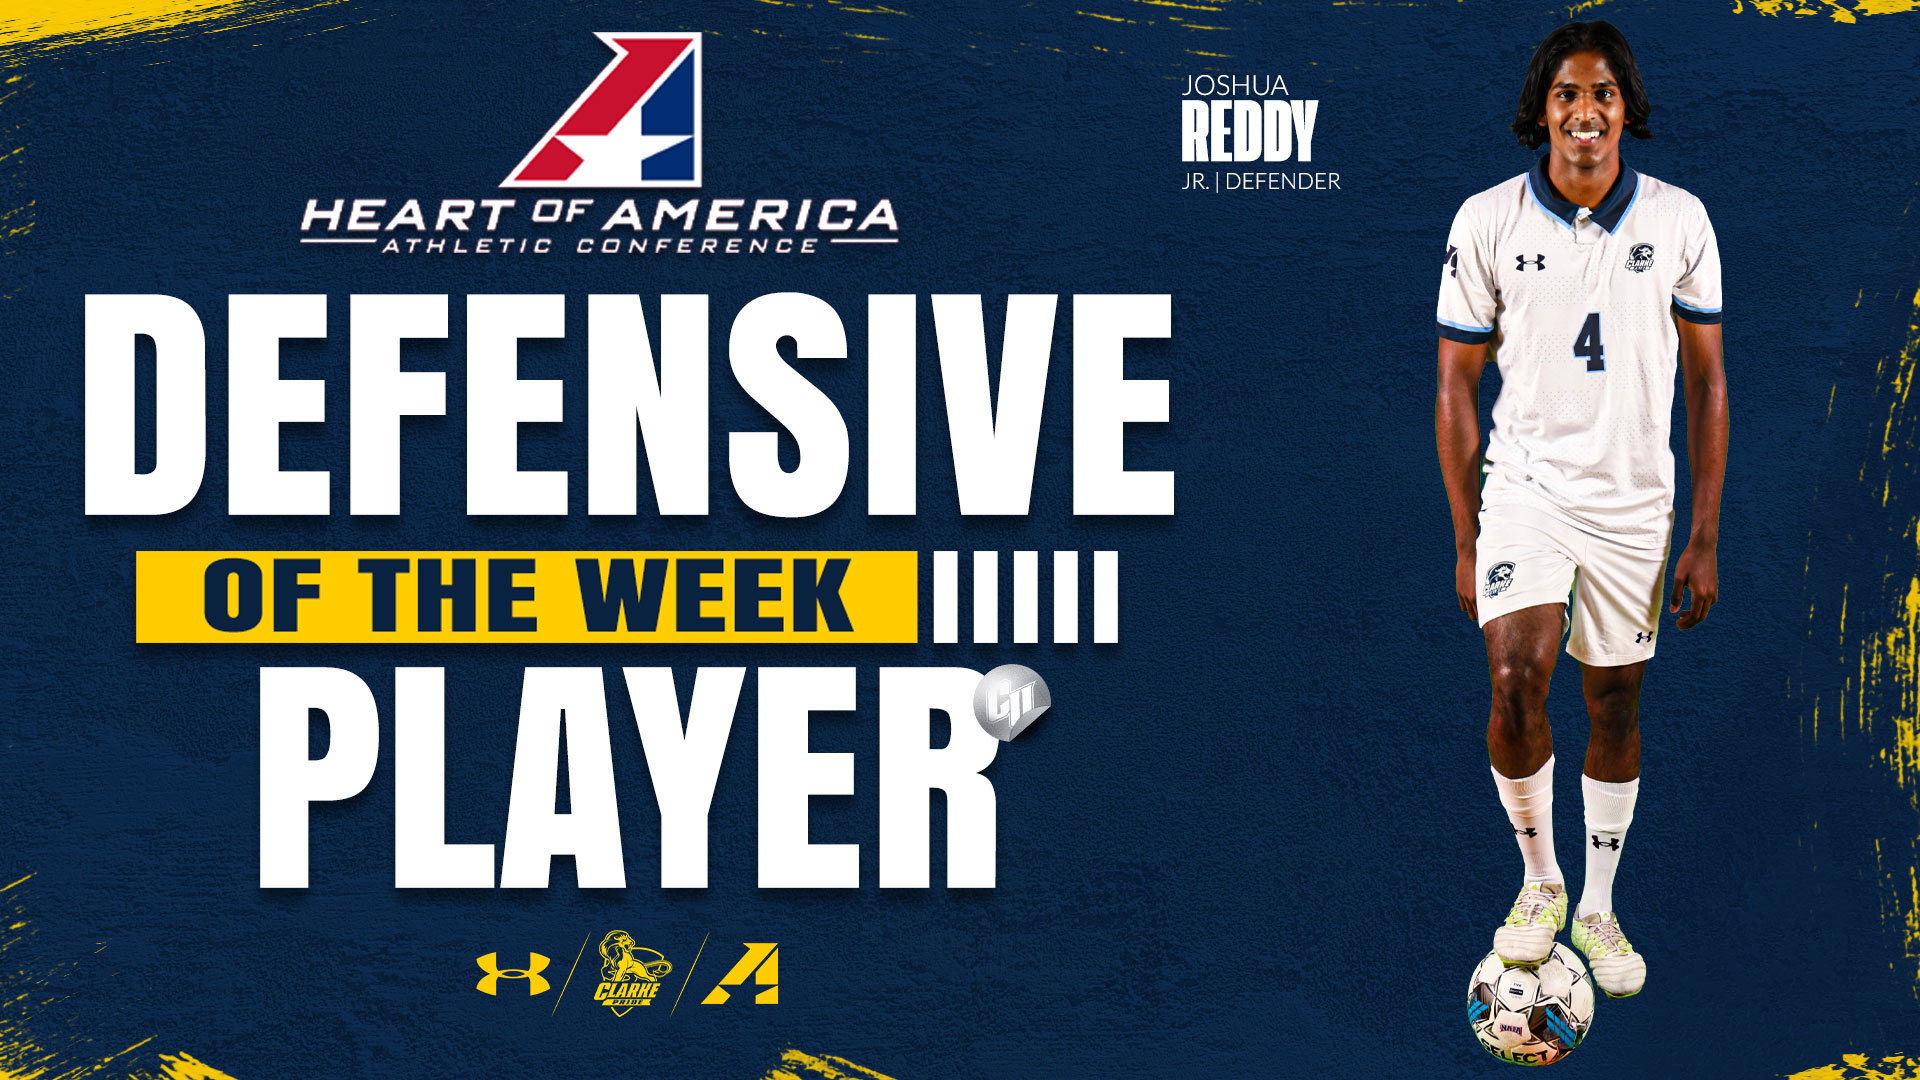 Reddy claims Heart Defensive Player of the Week following Pride's shutout win